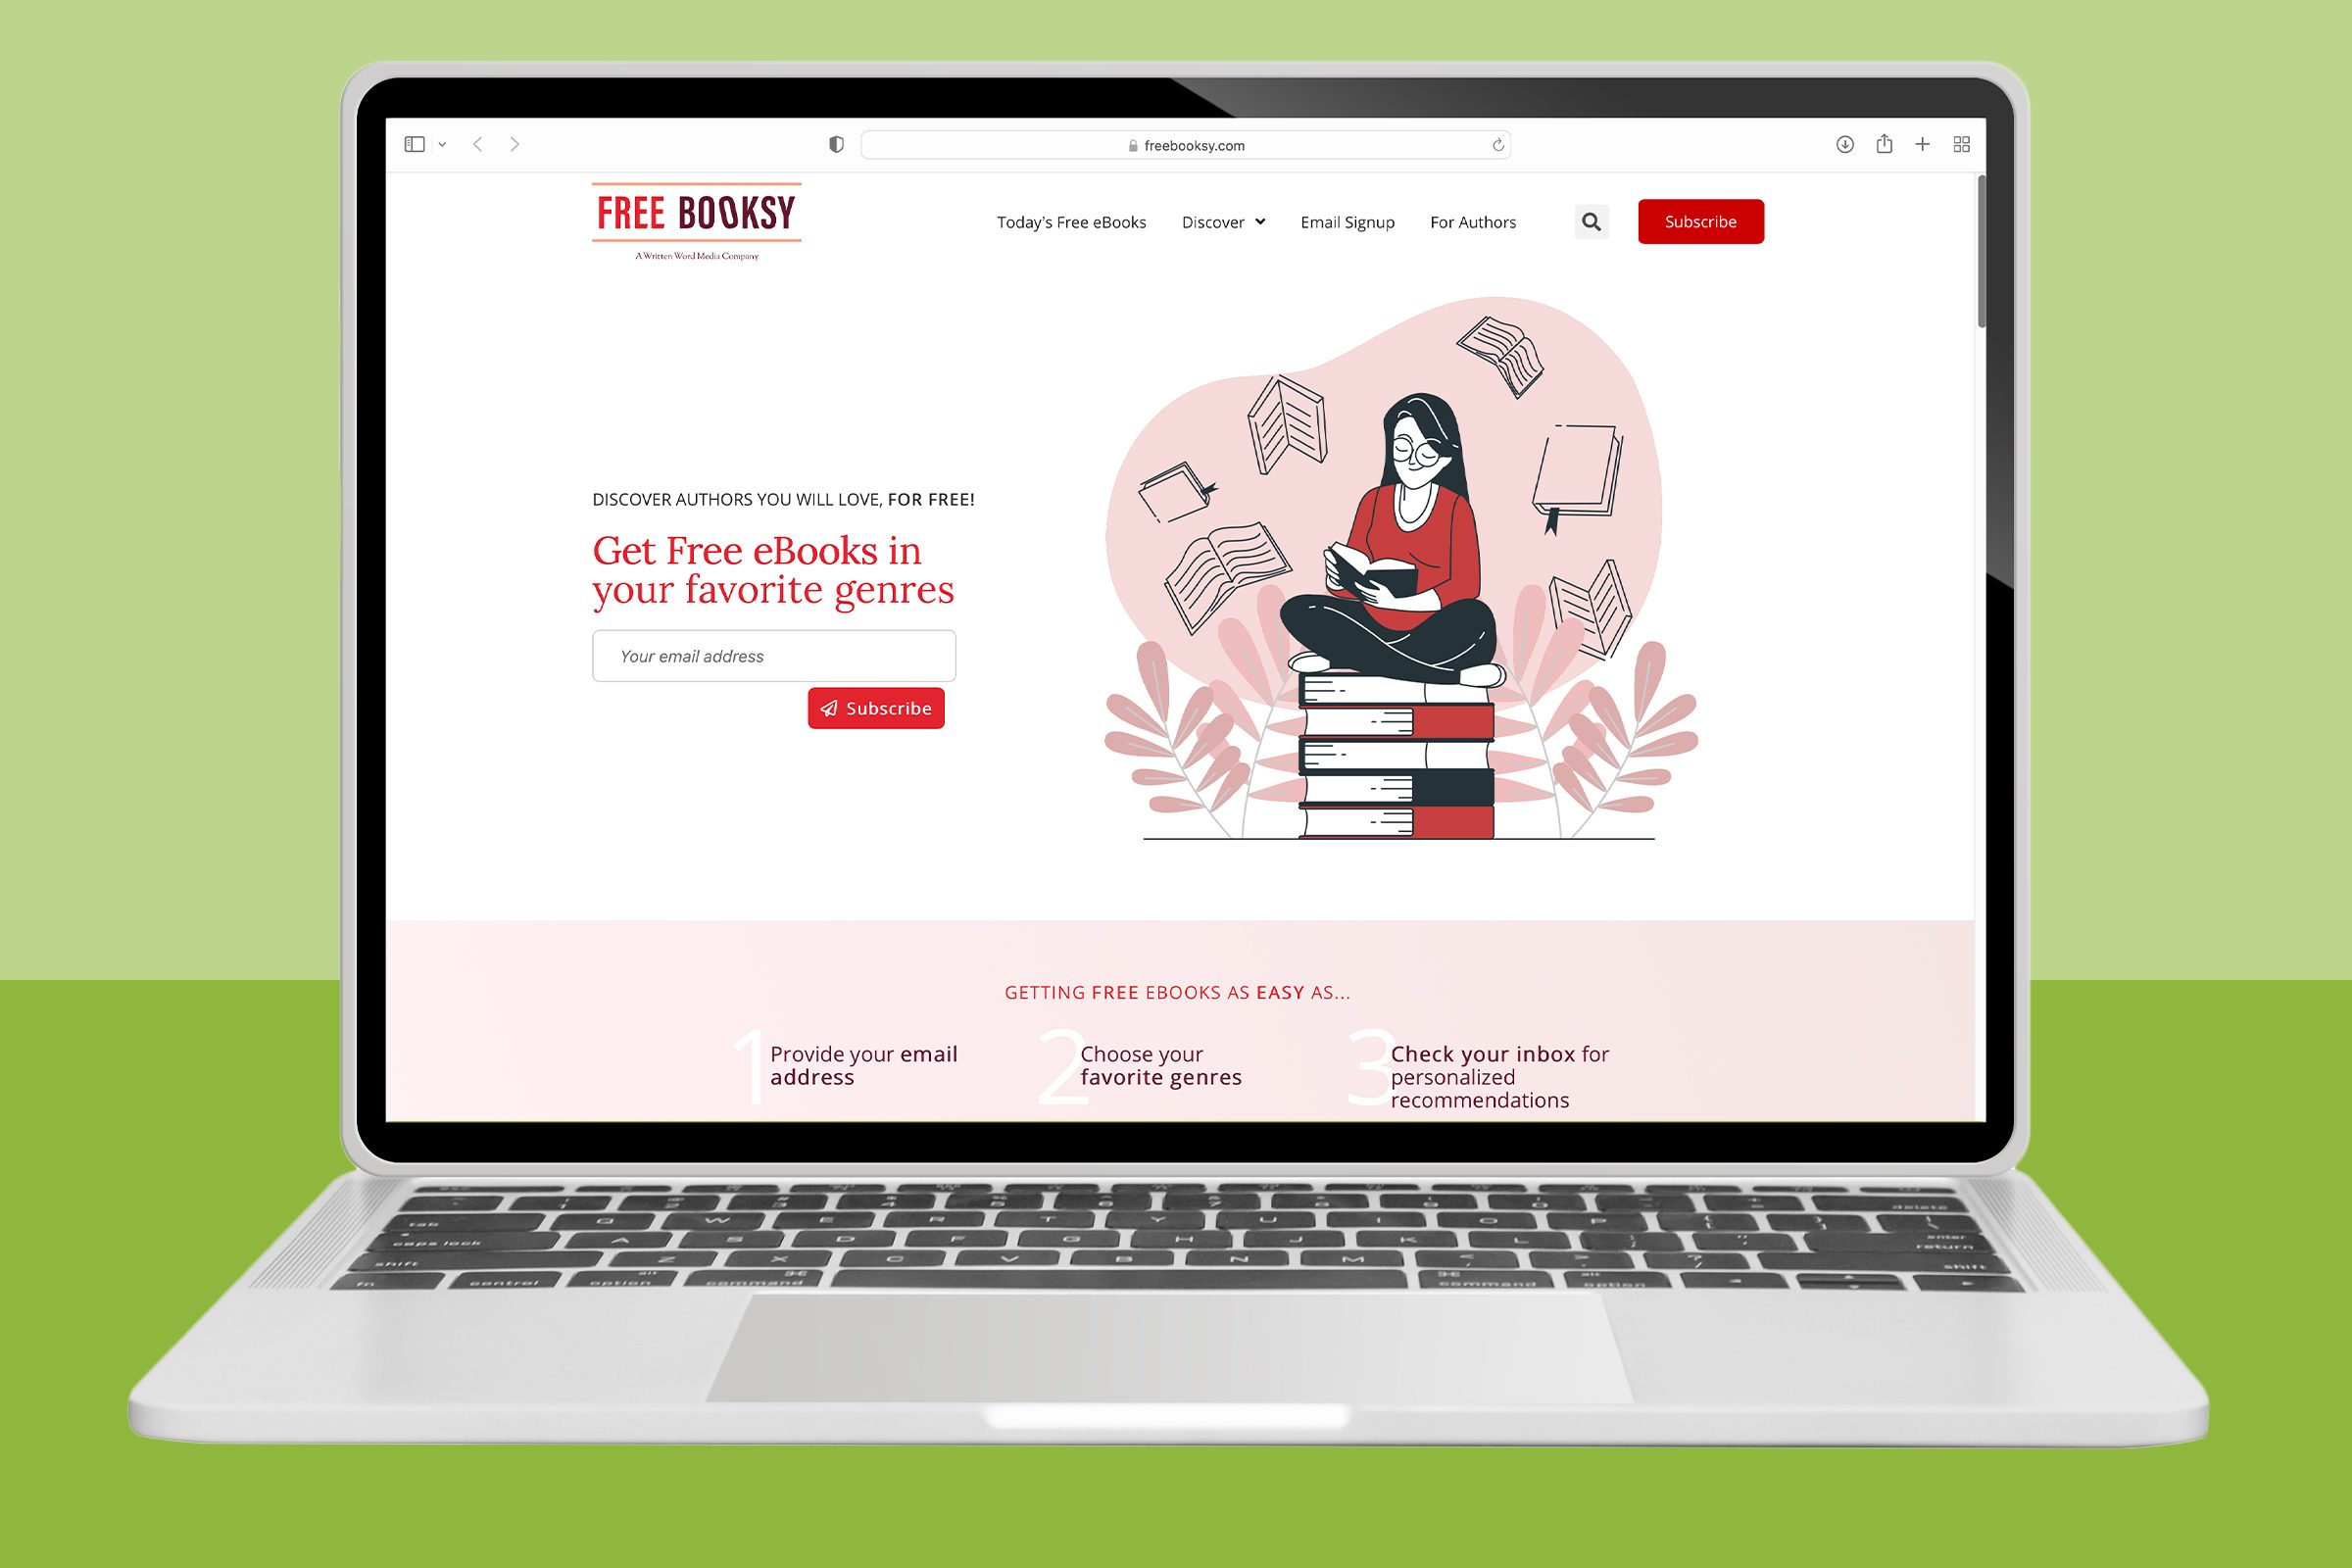 <p>If you're the sort of bookworm who likes to seriously stock up, <a href="https://www.freebooksy.com/" rel="noopener noreferrer">Freebooksy</a> will be your new best friend. The team updates the site with at least one free e-book daily, though they often post multiple e-books from various genres, including romance, <a href="https://www.rd.com/list/mystery-books/" rel="noopener noreferrer">mystery</a>, <a href="https://www.rd.com/list/science-fiction-books/" rel="noopener noreferrer">science fiction</a>, <a href="https://www.rd.com/list/the-best-fantasy-books/" rel="noopener noreferrer">fantasy</a> and even <a href="https://www.rd.com/list/best-books-for-teens/" rel="noopener noreferrer">YA novels</a> and <a href="https://www.rd.com/list/the-best-childrens-books-ever-written/" rel="noopener noreferrer">children's books</a>. You'll find the book cover, a brief blurb and when the book will be free (for a limited time only!), so you can decide if it's the right book for you.</p> <p>What's great about Freebooksy is that you don't have to create a separate account or download an app; it simply links to the free book in the Kindle store. Be sure to subscribe to the mailing list so you don't have to check the website every day. Instead, Freebooksy will send recommendations straight to your inbox.</p> <p><strong>Pros:</strong></p> <ul> <li class="">Easy to navigate and filter by genre</li> <li class="">No app necessary</li> <li class="">No need to create an account</li> <li class="">No return deadlines</li> </ul> <p><strong>Cons:</strong></p> <ul> <li class="">Need to click over to Amazon to see the books' ratings</li> <li class="">Have to scroll vertically for a while</li> <li class="">Books are free for a limited time only</li> <li class="">Mostly self-published books and titles from small publishers</li> </ul> <p class="listicle-page__cta-button-shop"><a class="shop-btn" href="https://www.freebooksy.com/">Read Now</a></p>